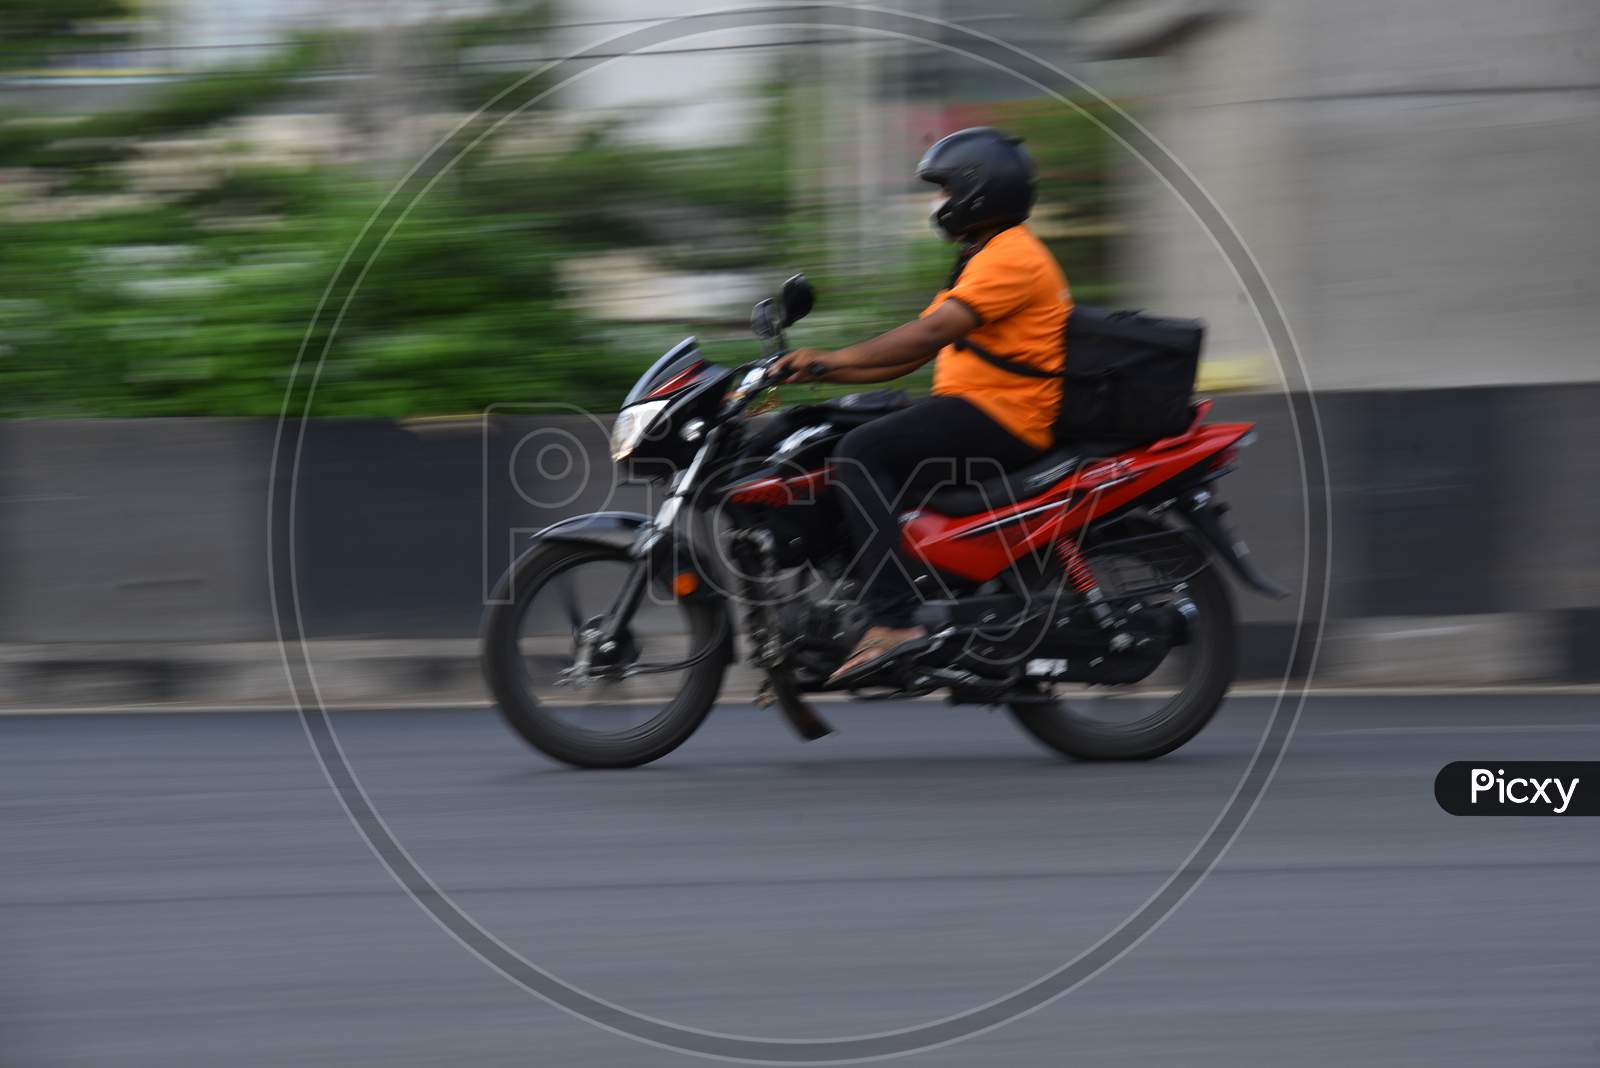 A swiggy delivery boy moves on his vehicle during nationwide lockdown amid coronavirus pandemic, April 8,2020, Hyderabad.